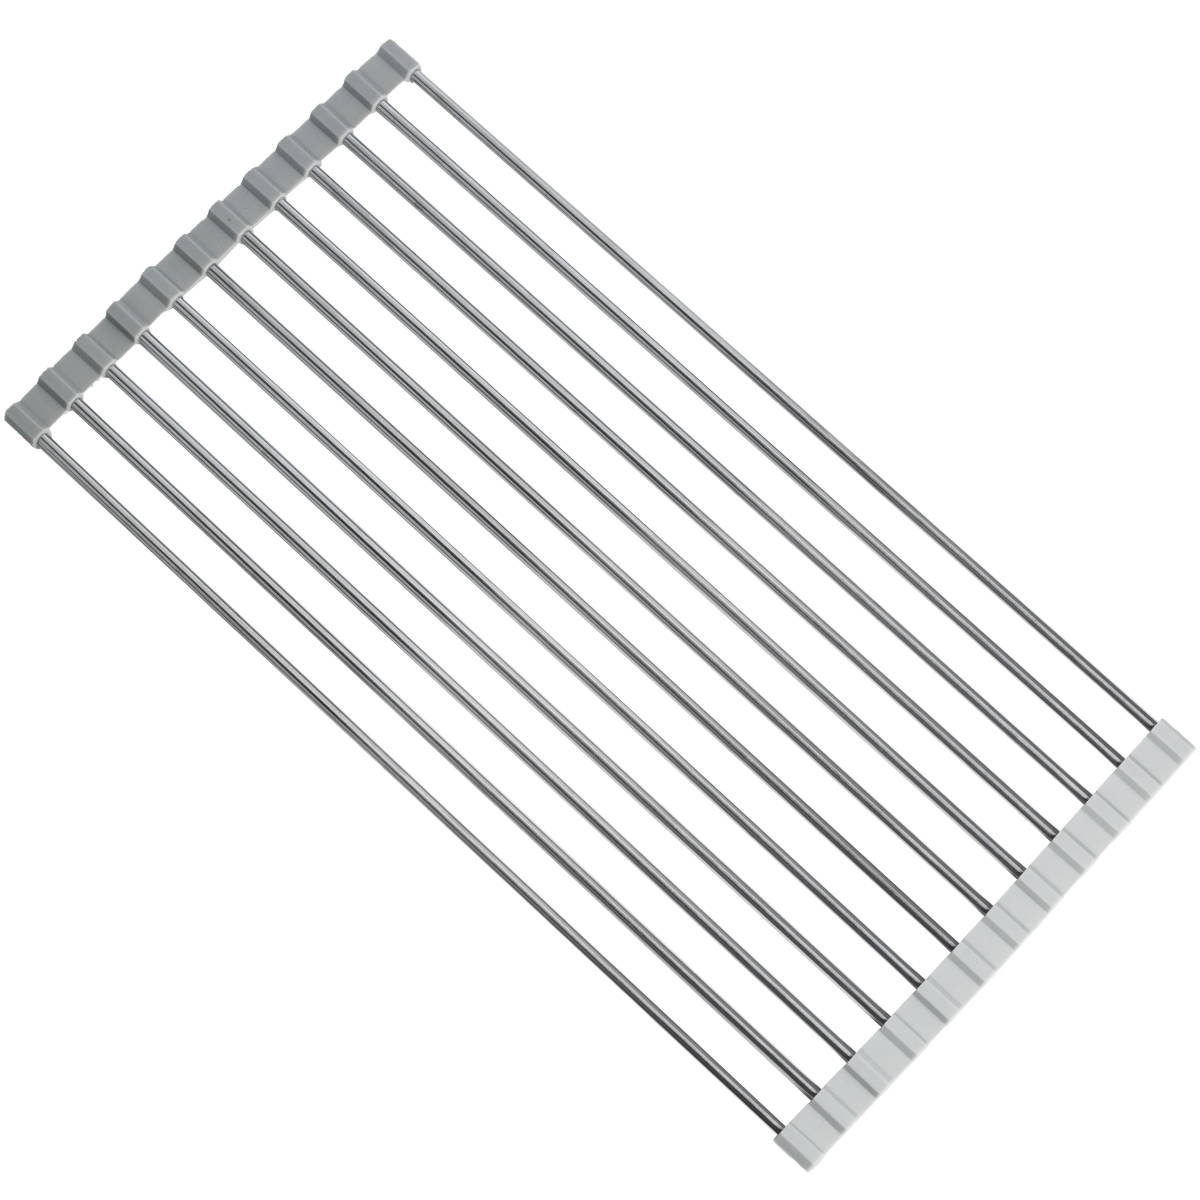 https://www.berings.com/wp-content/uploads/2023/03/Over-the-Sink-Stainless-Steel-Dish-Drying-Rack.jpg